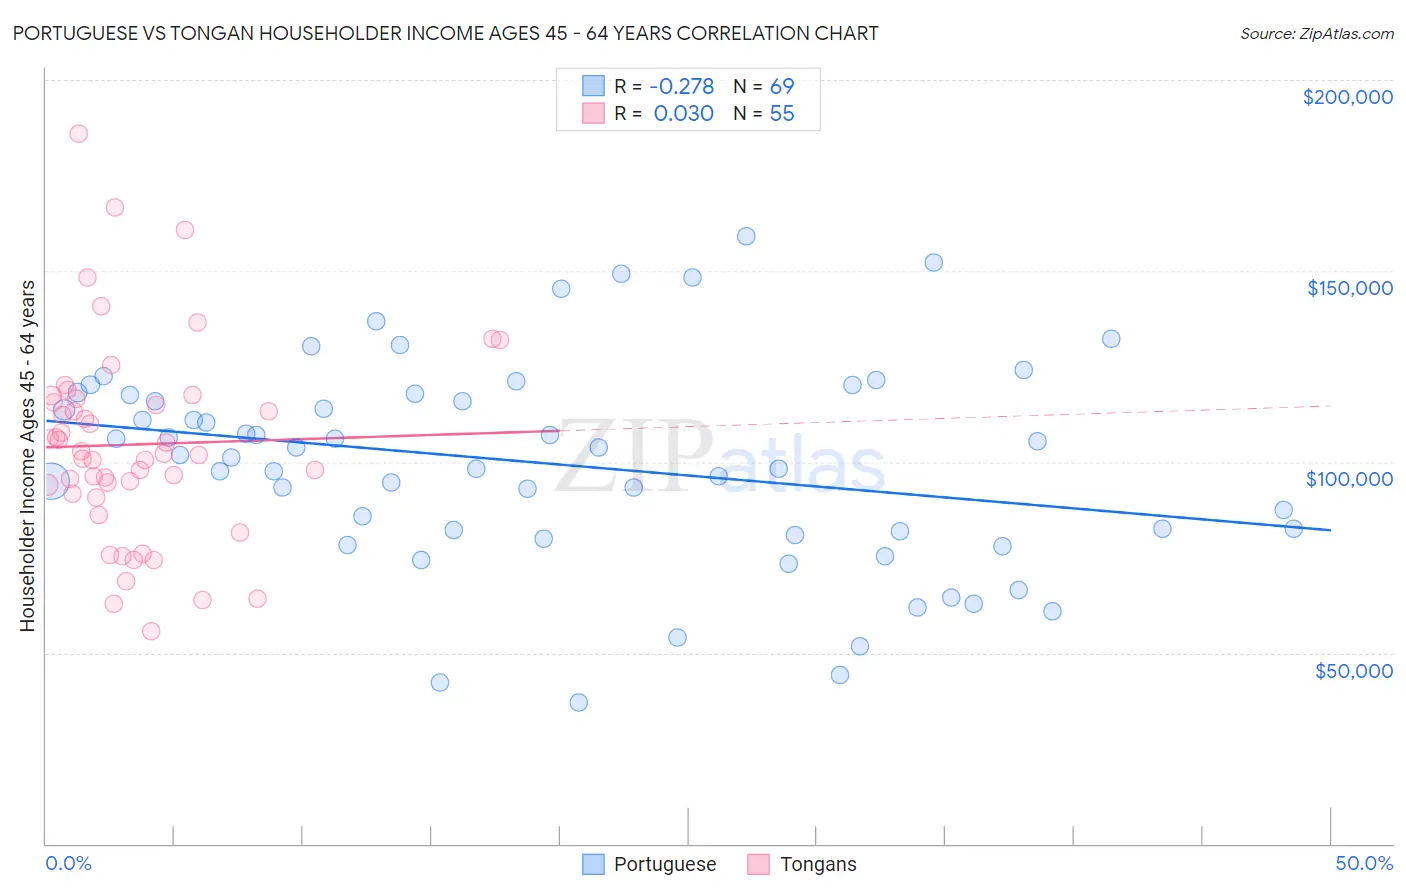 Portuguese vs Tongan Householder Income Ages 45 - 64 years